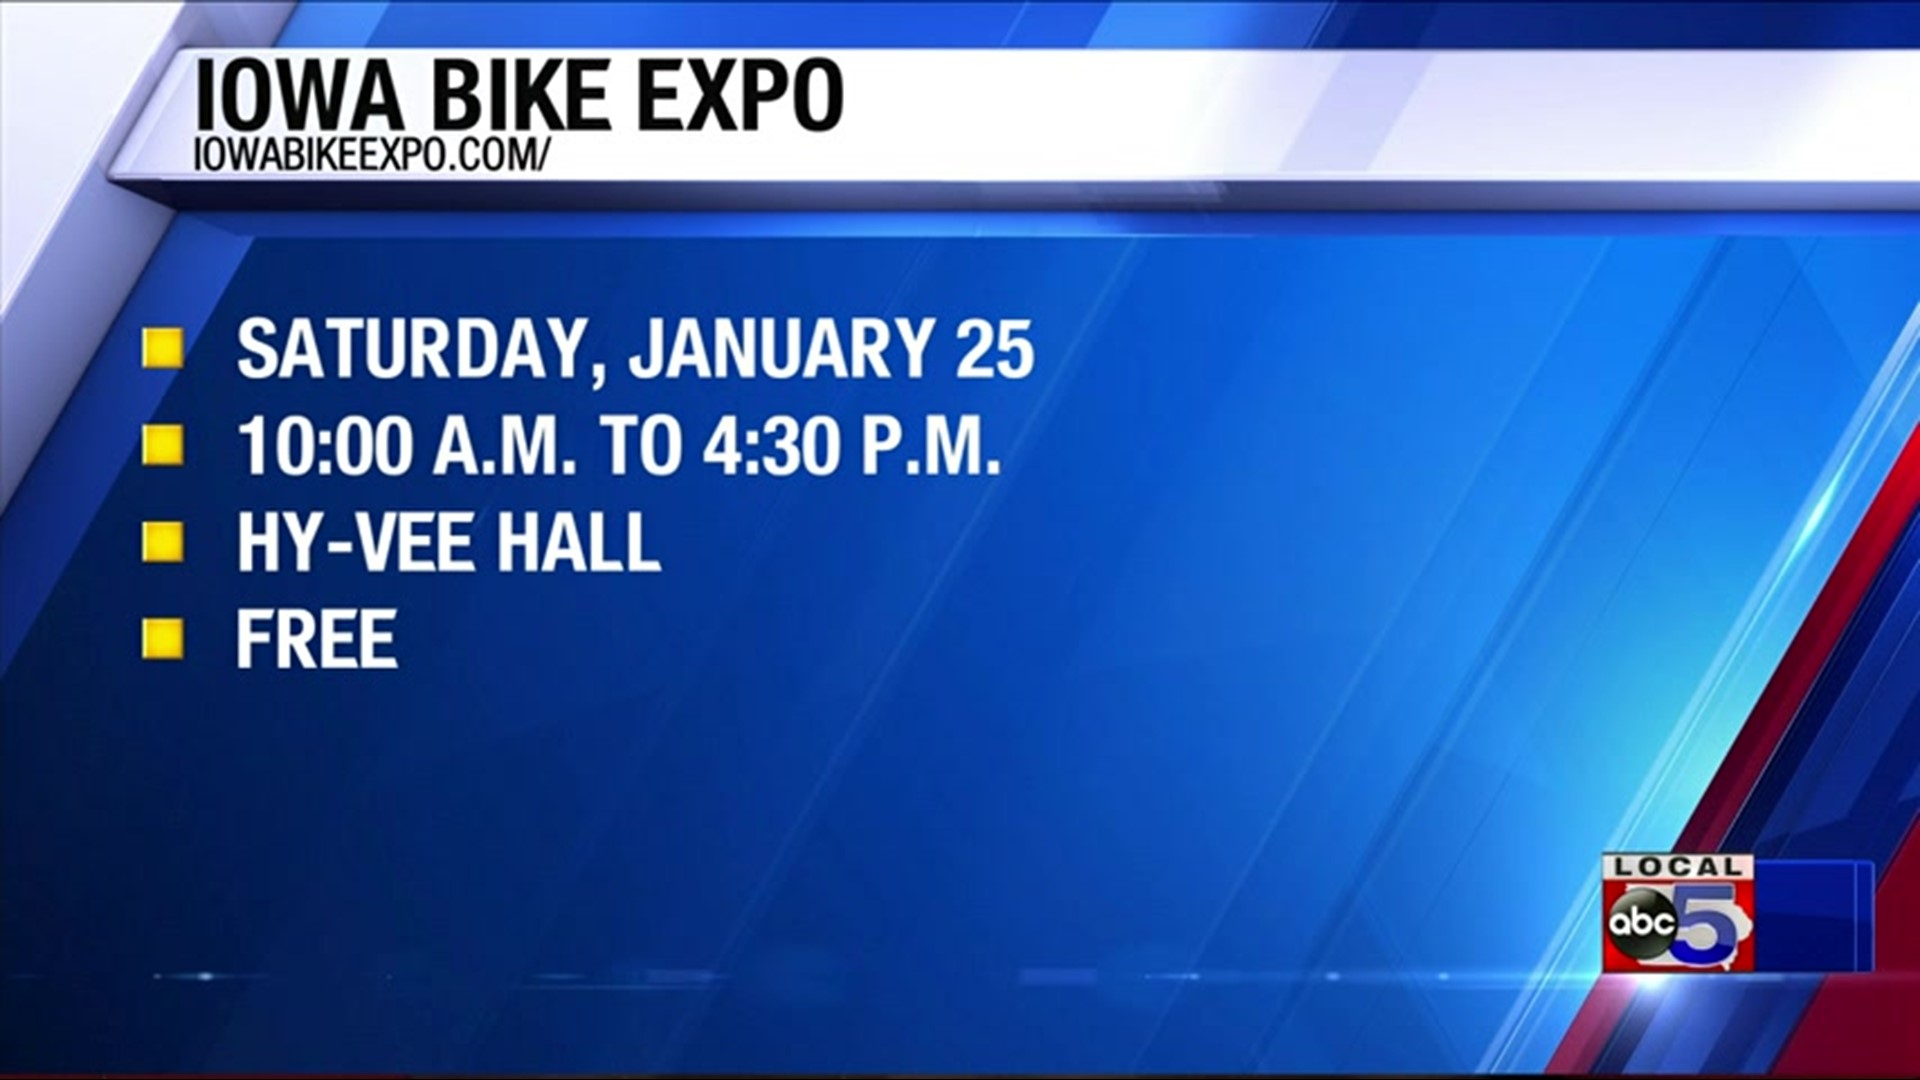 Saturday, bicycle enthusiasts can get all their cycling needs fulfilled as Iowa Bike Expo returns to downtown Des Moines.